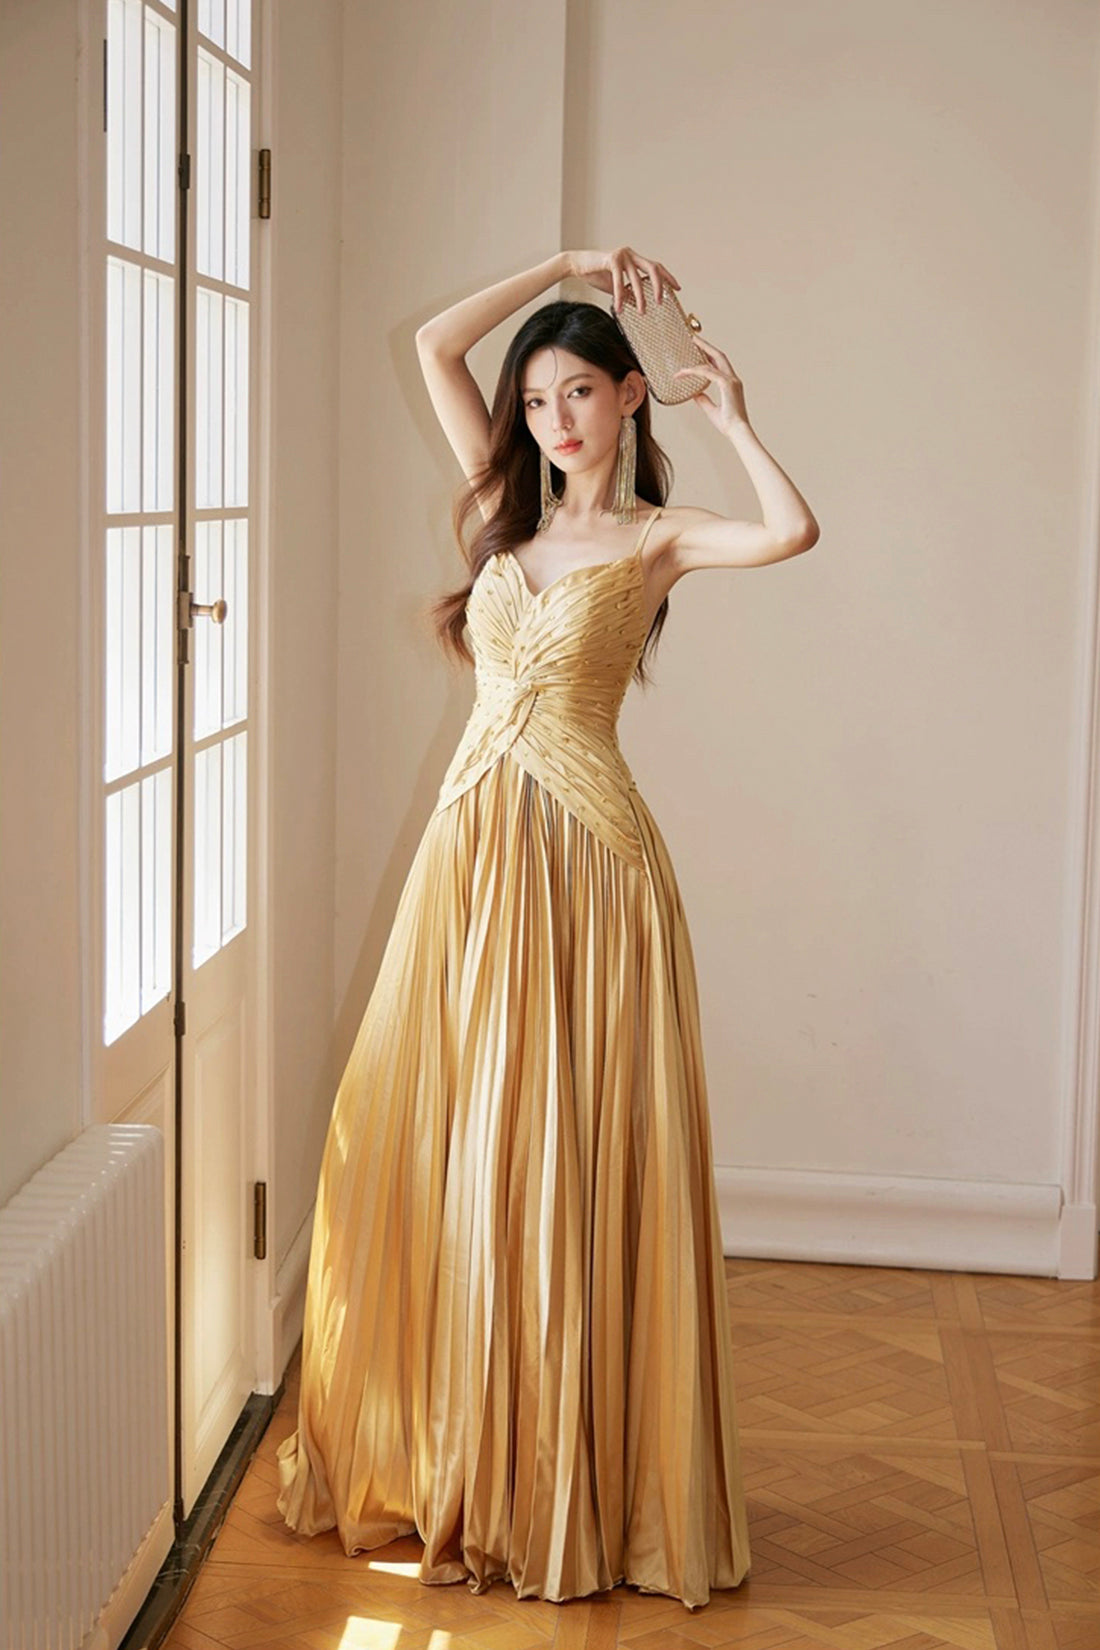 Gold Satin Long Backless Prom Dress, A-Line Spaghetti Strap Evening Party Dress